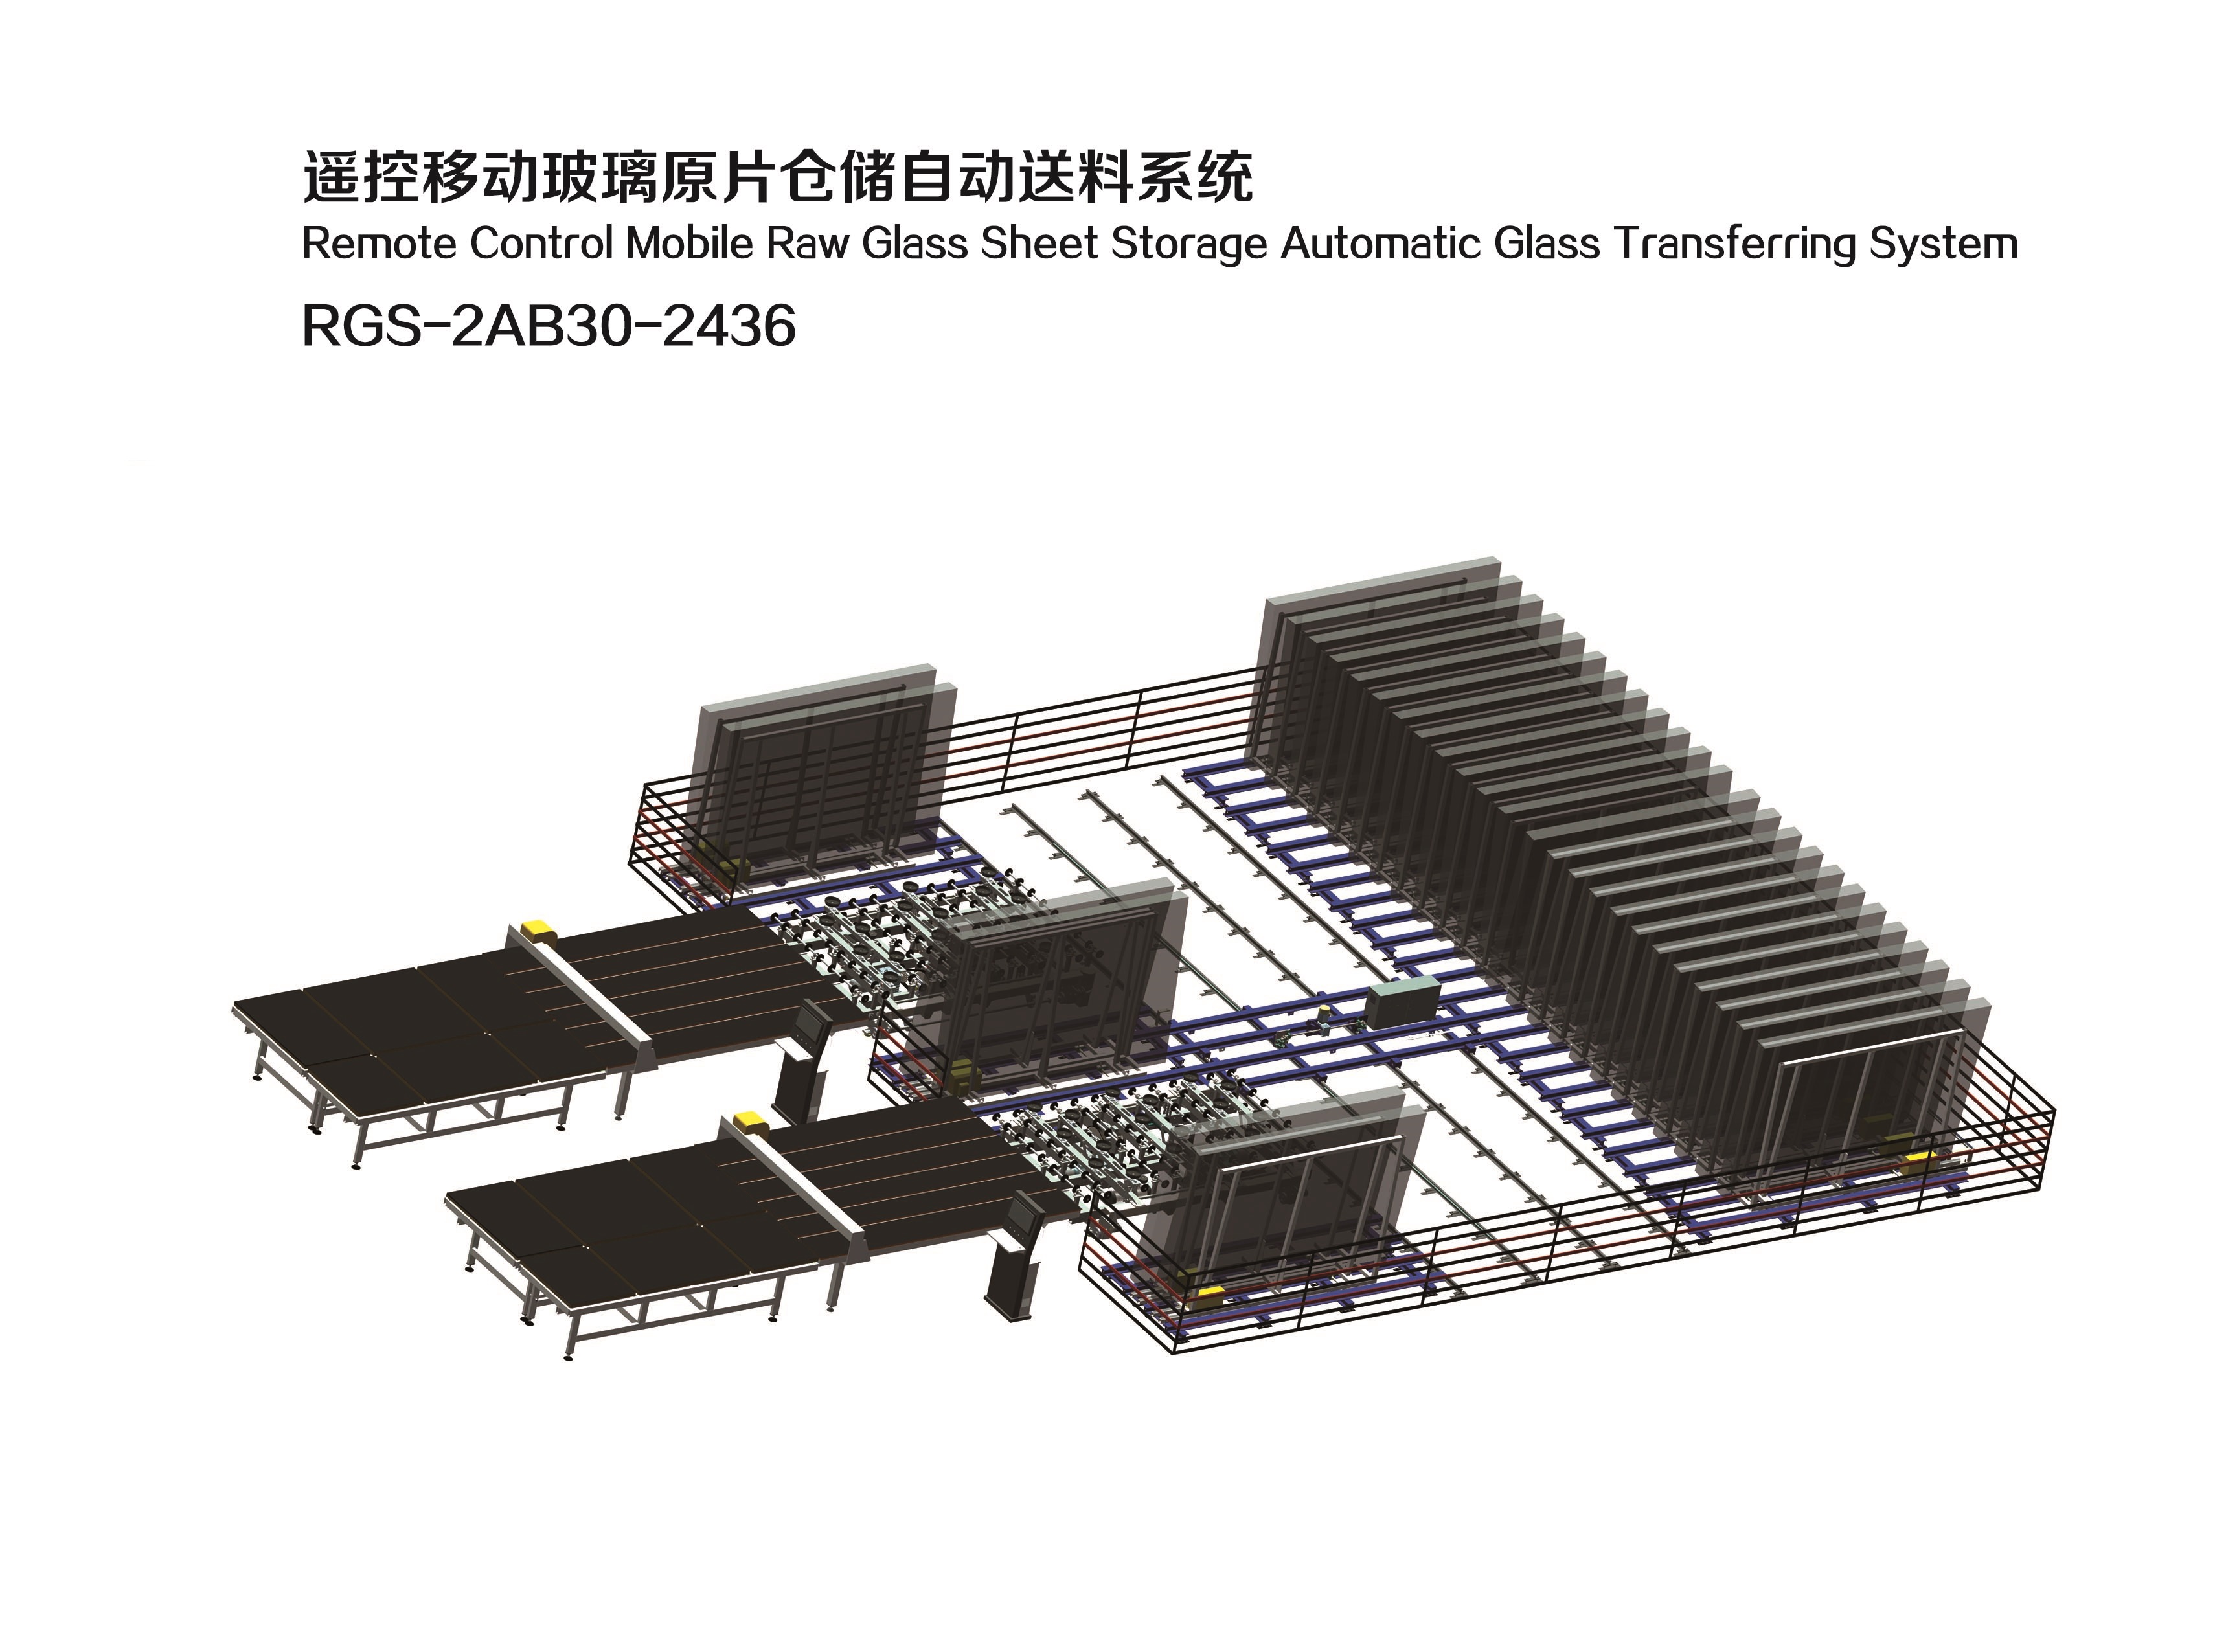 New Fashion Design for Desiccant Automatic Filling Machine -
 Automatic Glass Sheet Shuttle Storage System,Automatic Glass Sheet Storage Loading Cutting System,Smart Automatic Glass Sheet Storage L...